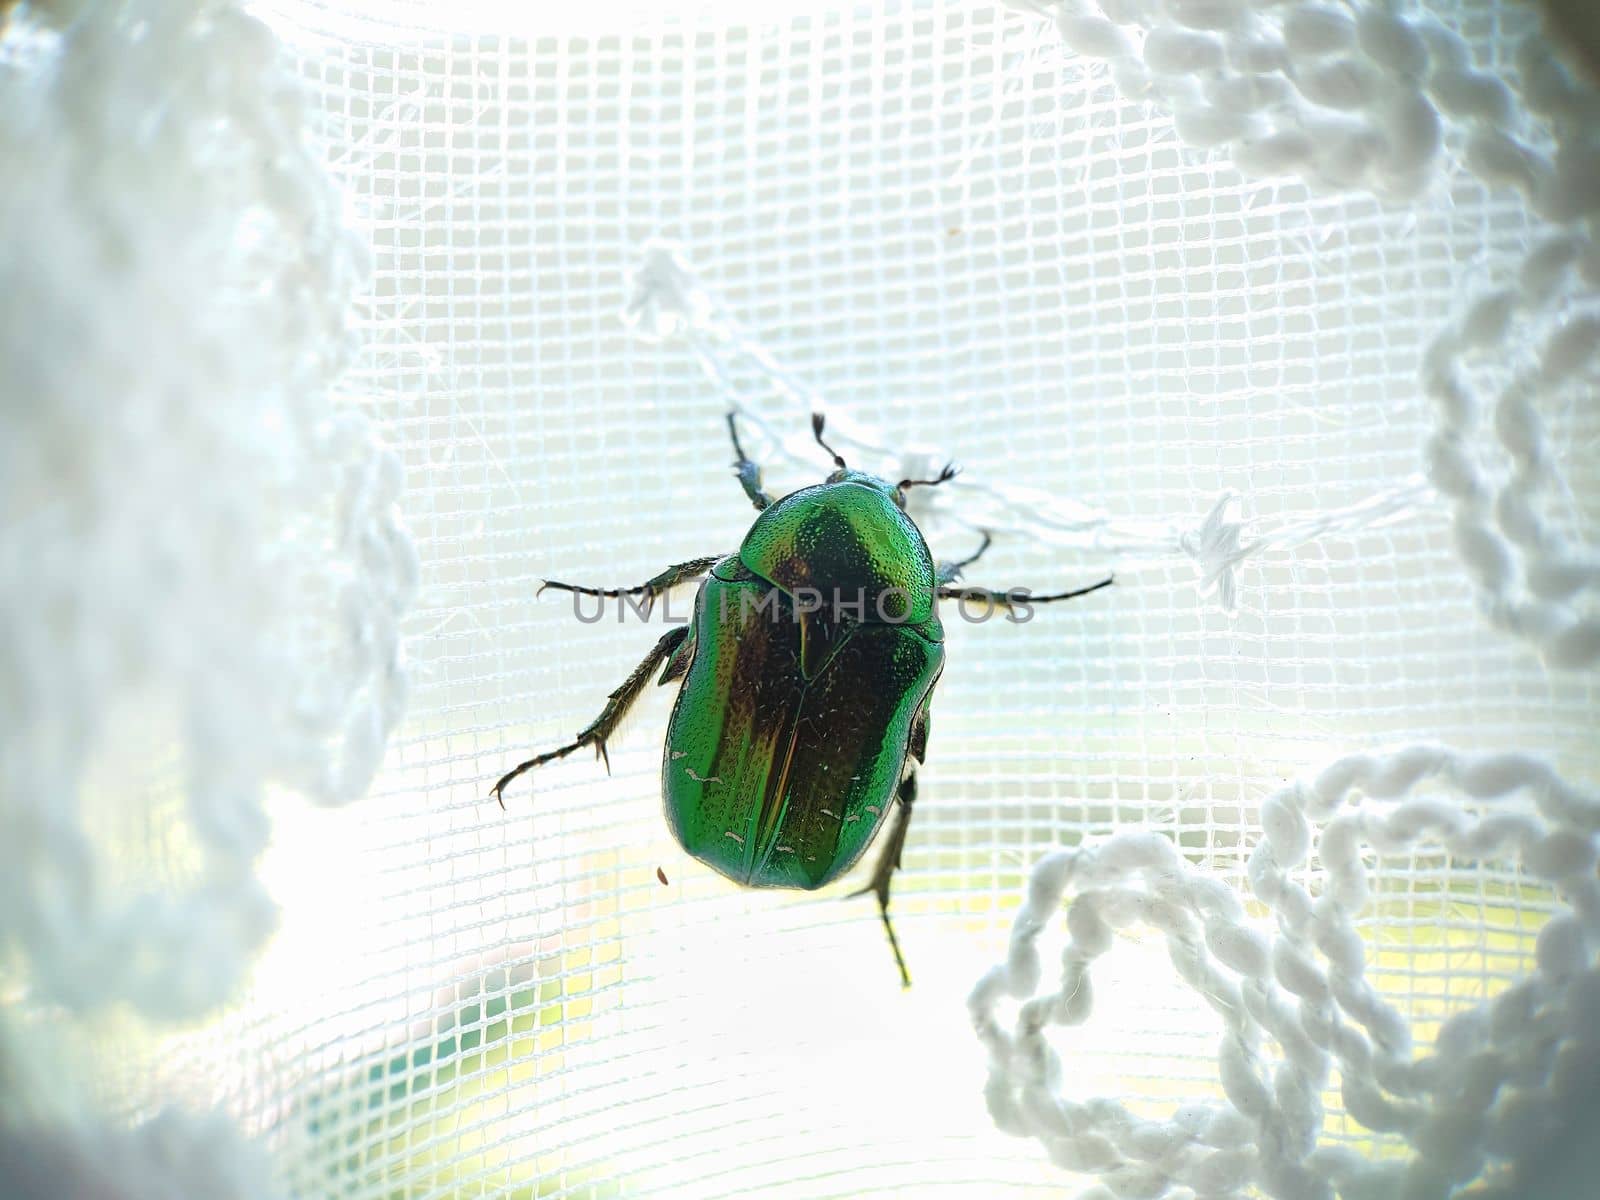 A large green beetle crawls up the white curtains by Mastak80